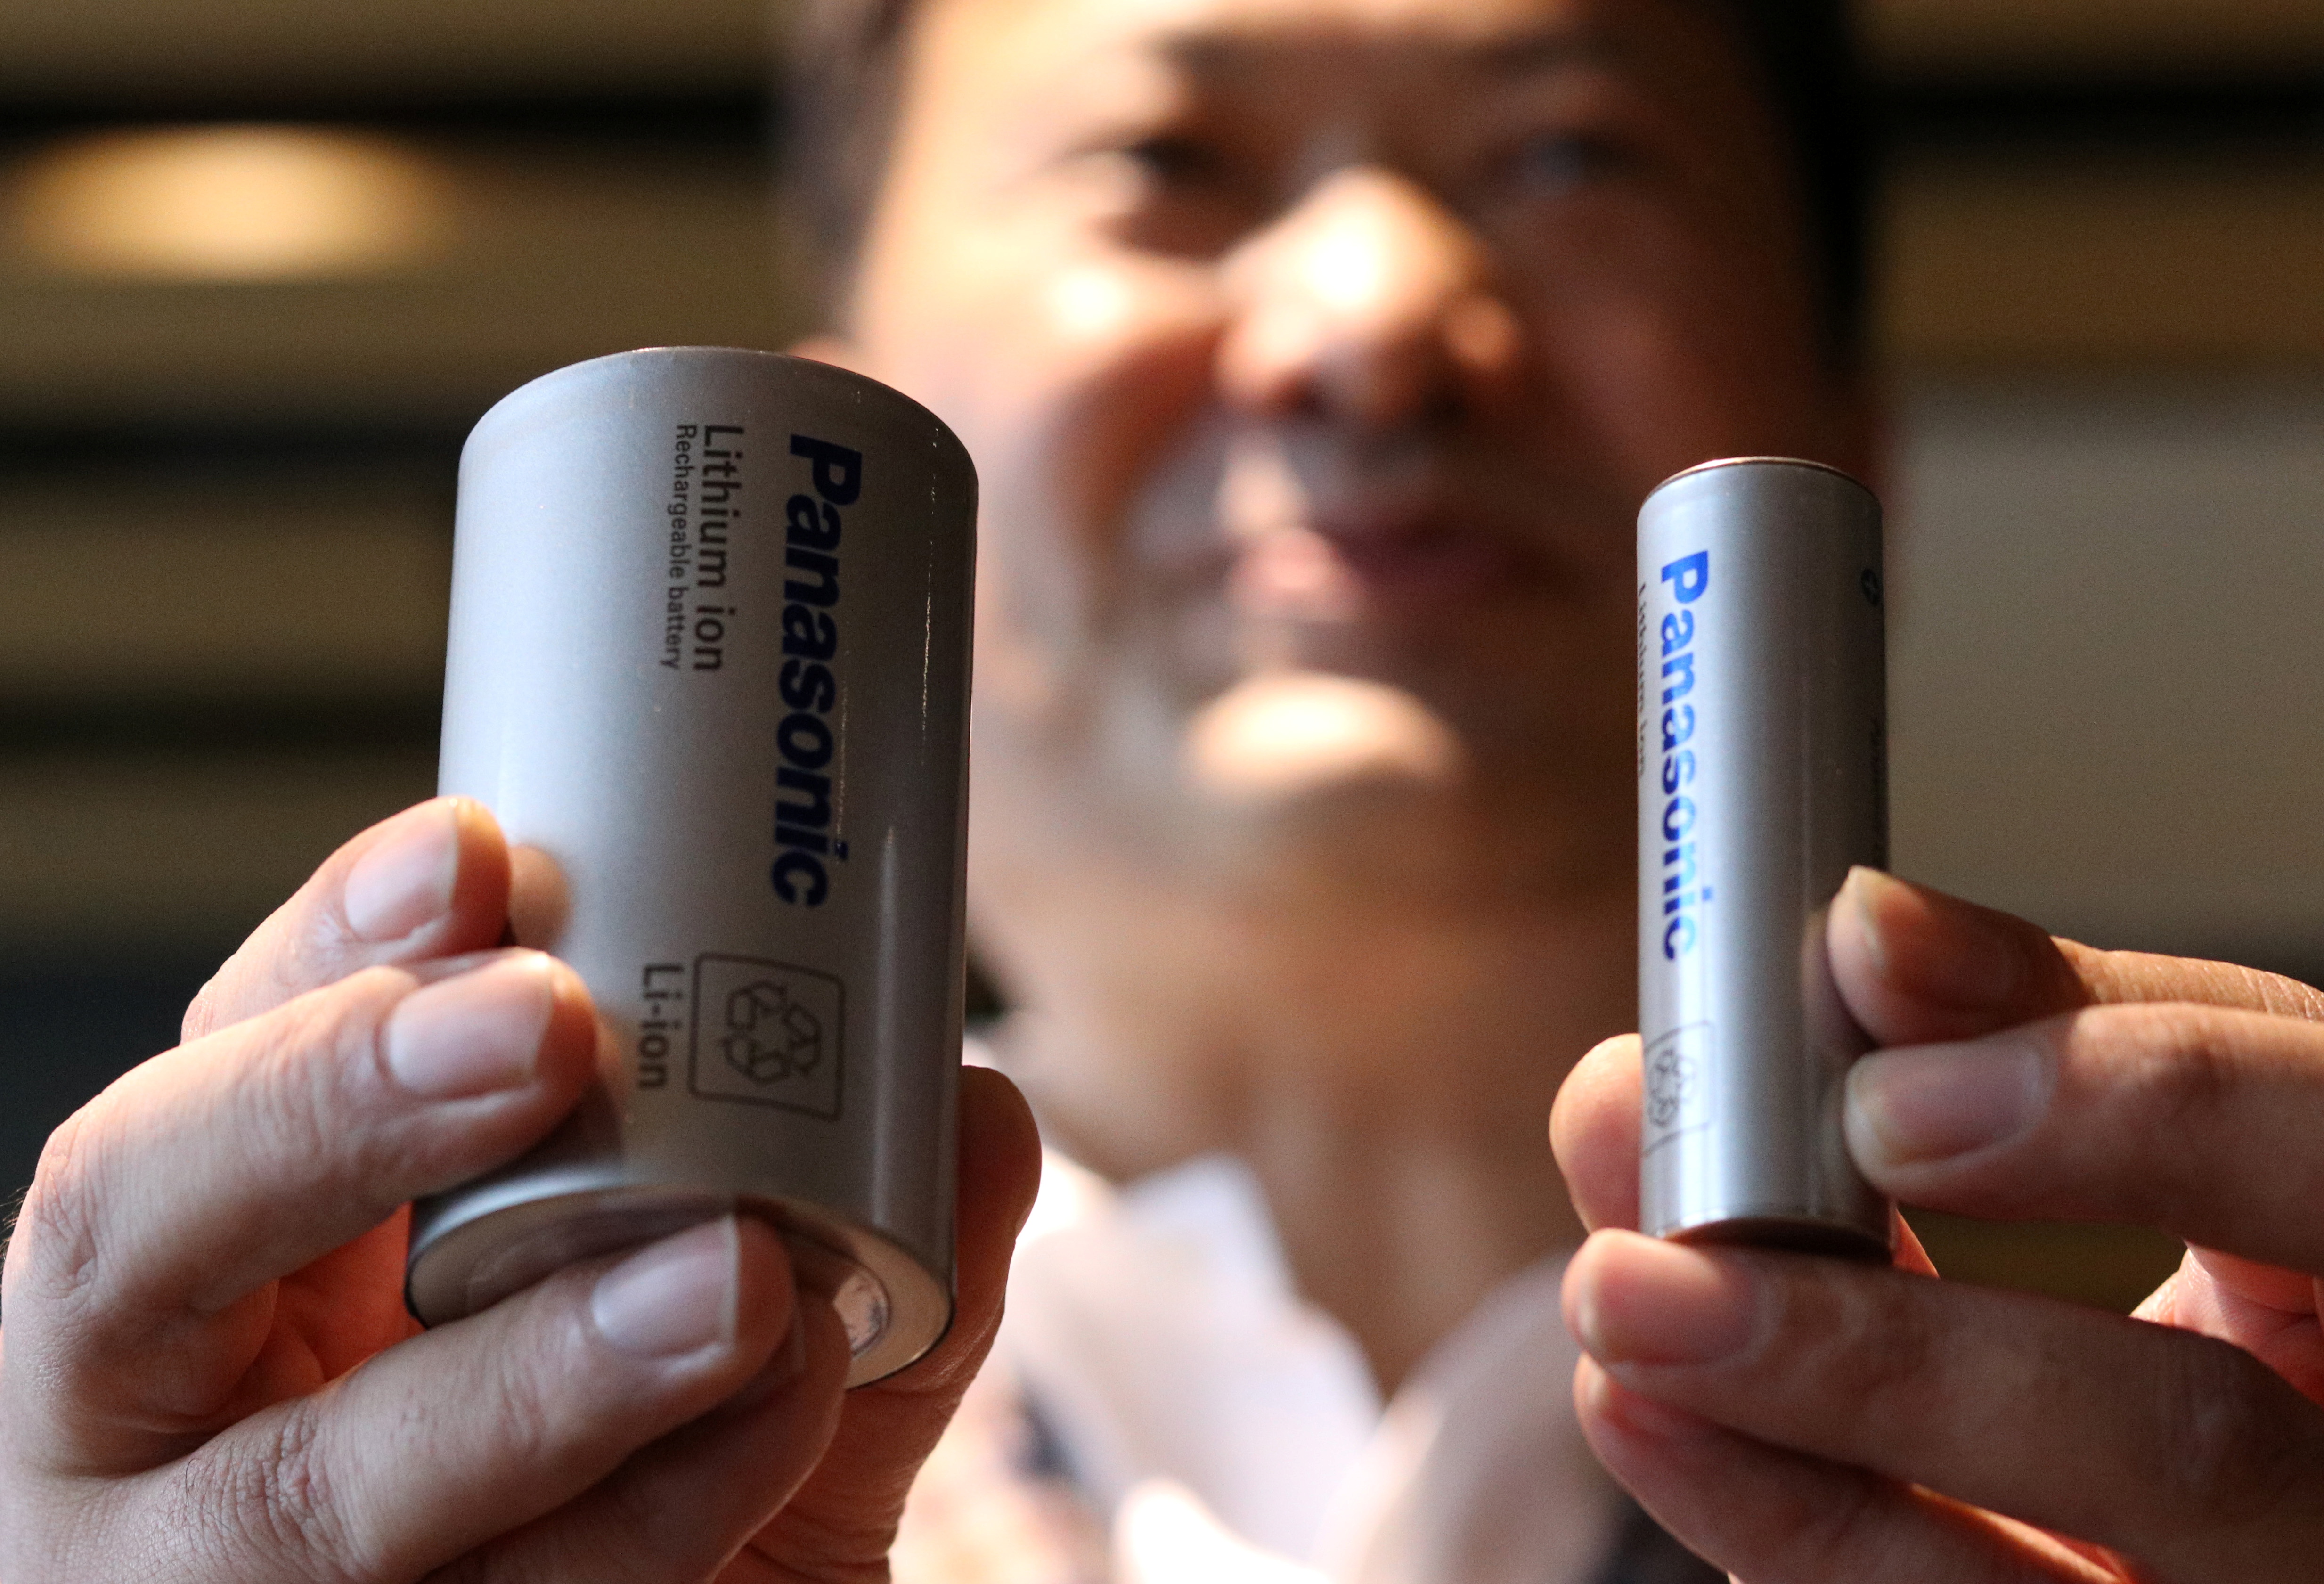 Kazuo Tadanobu, CEO of the energy company Panasonic, shows a prototype of a 4680 and 2170 battery cell similar to the one supplied to Tesla (REUTERS / Tim Kelly)